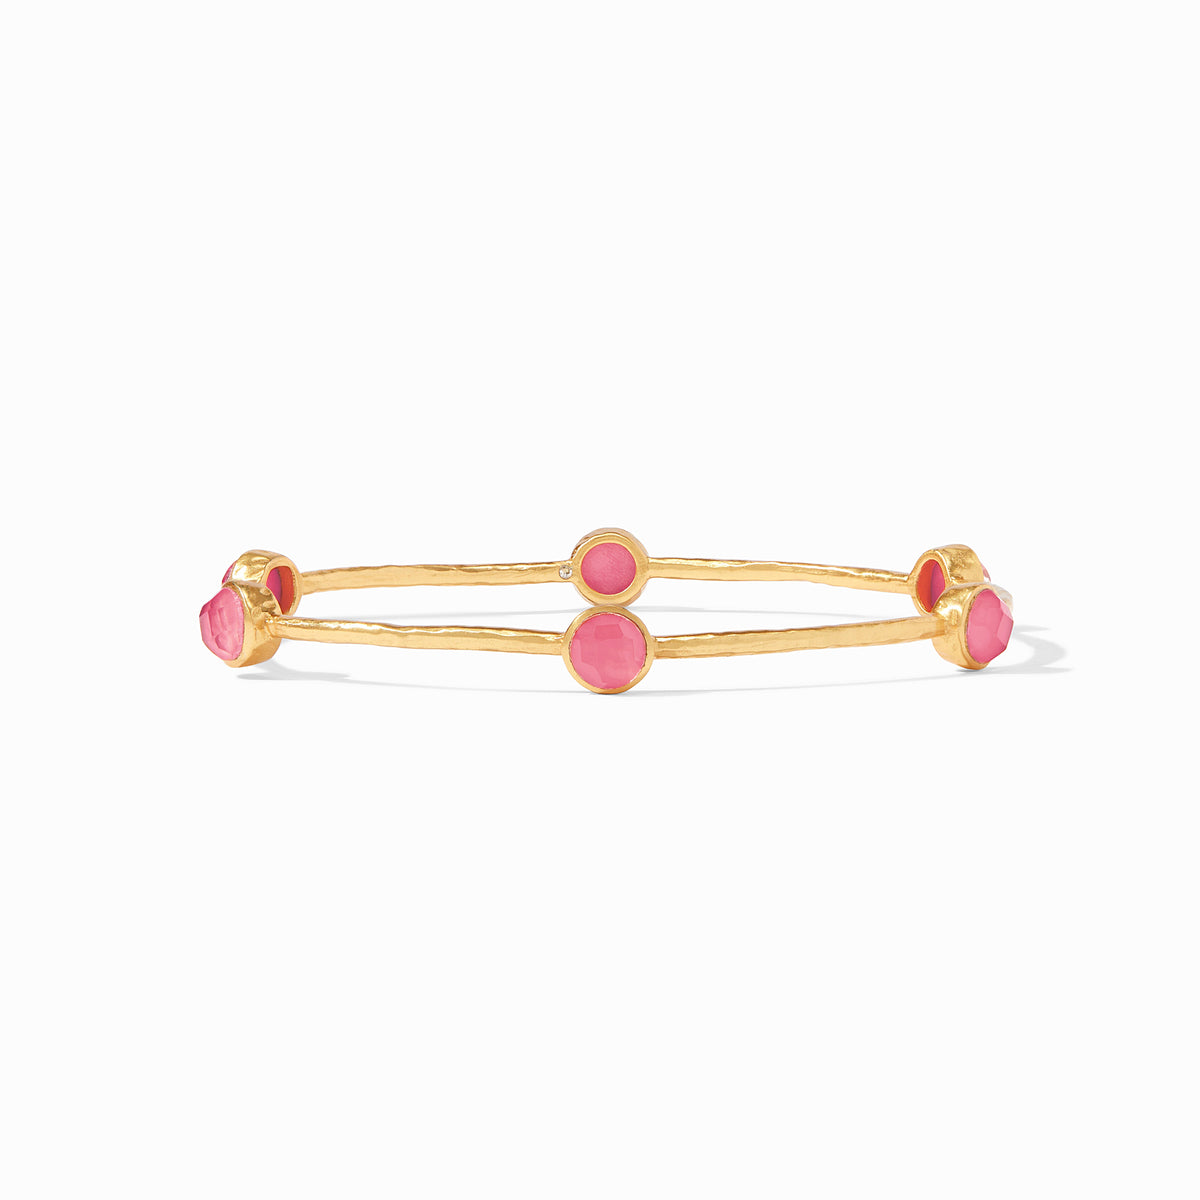 Julie Vos - Milano Luxe Bangle, Iridescent Peony Pink / Large